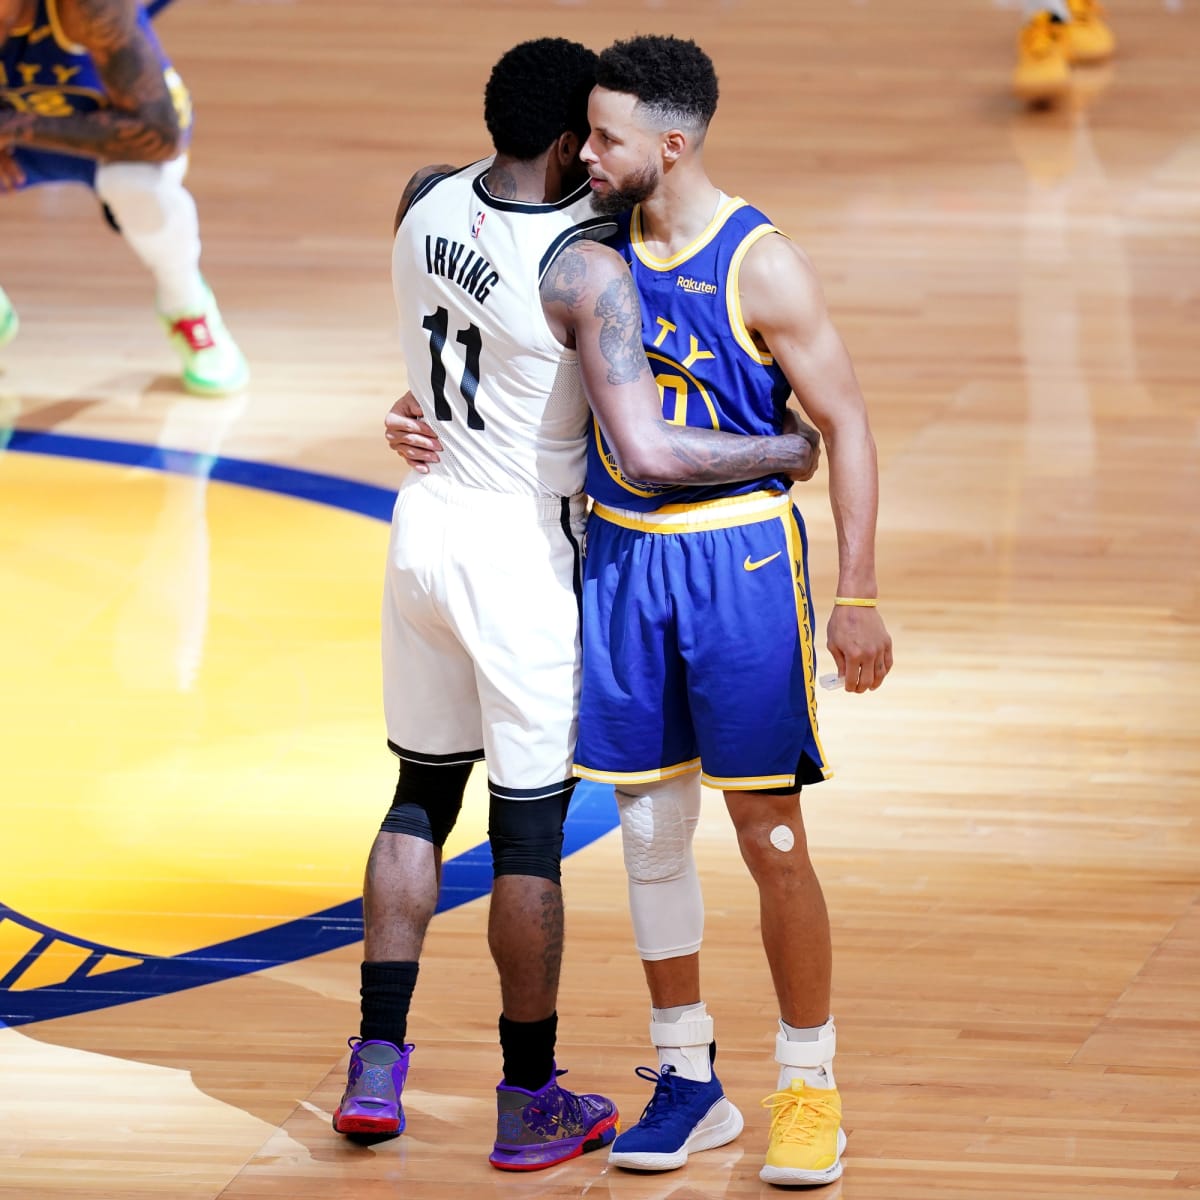 Is Steph Curry and the Warriors still haunted by Kyrie Irving's